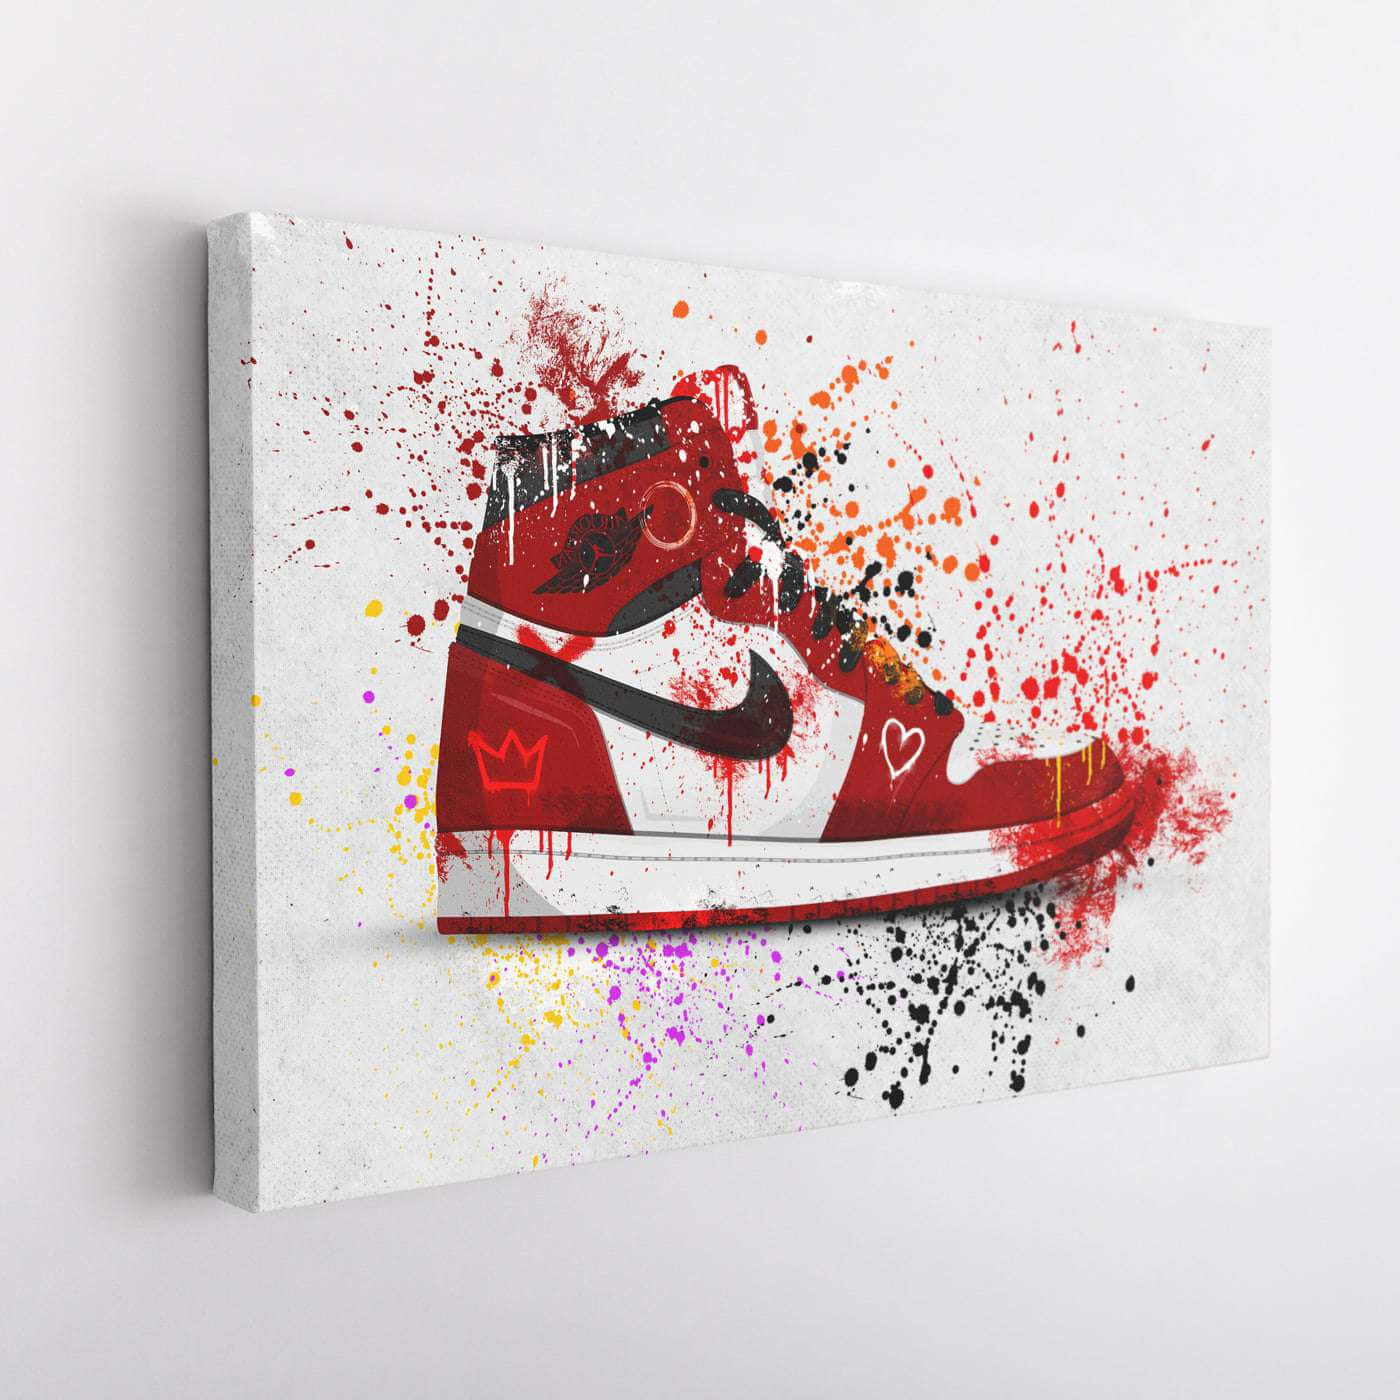 A Canvas With A Red And White Air Jordan 1